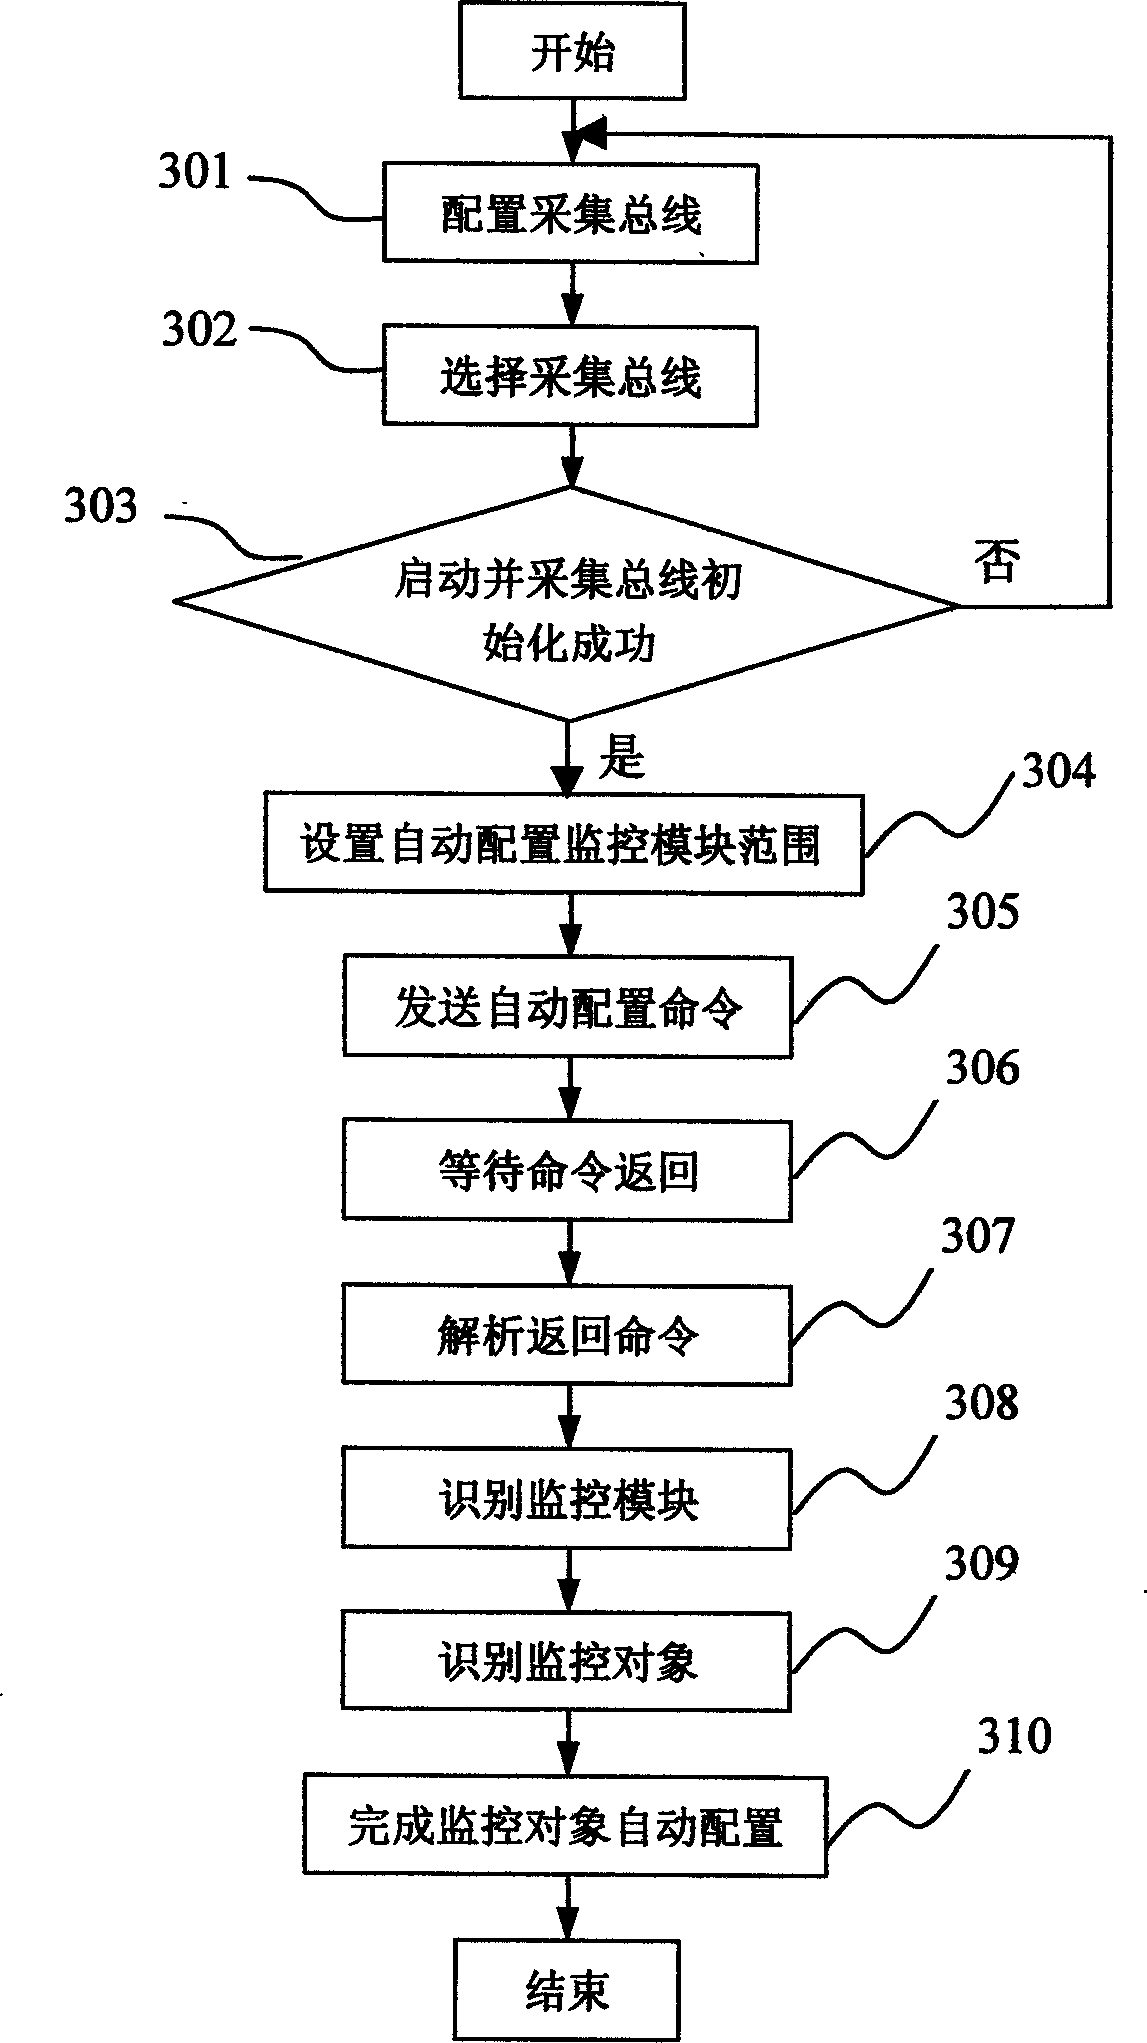 Dynamic layout method of power environment monitoring system